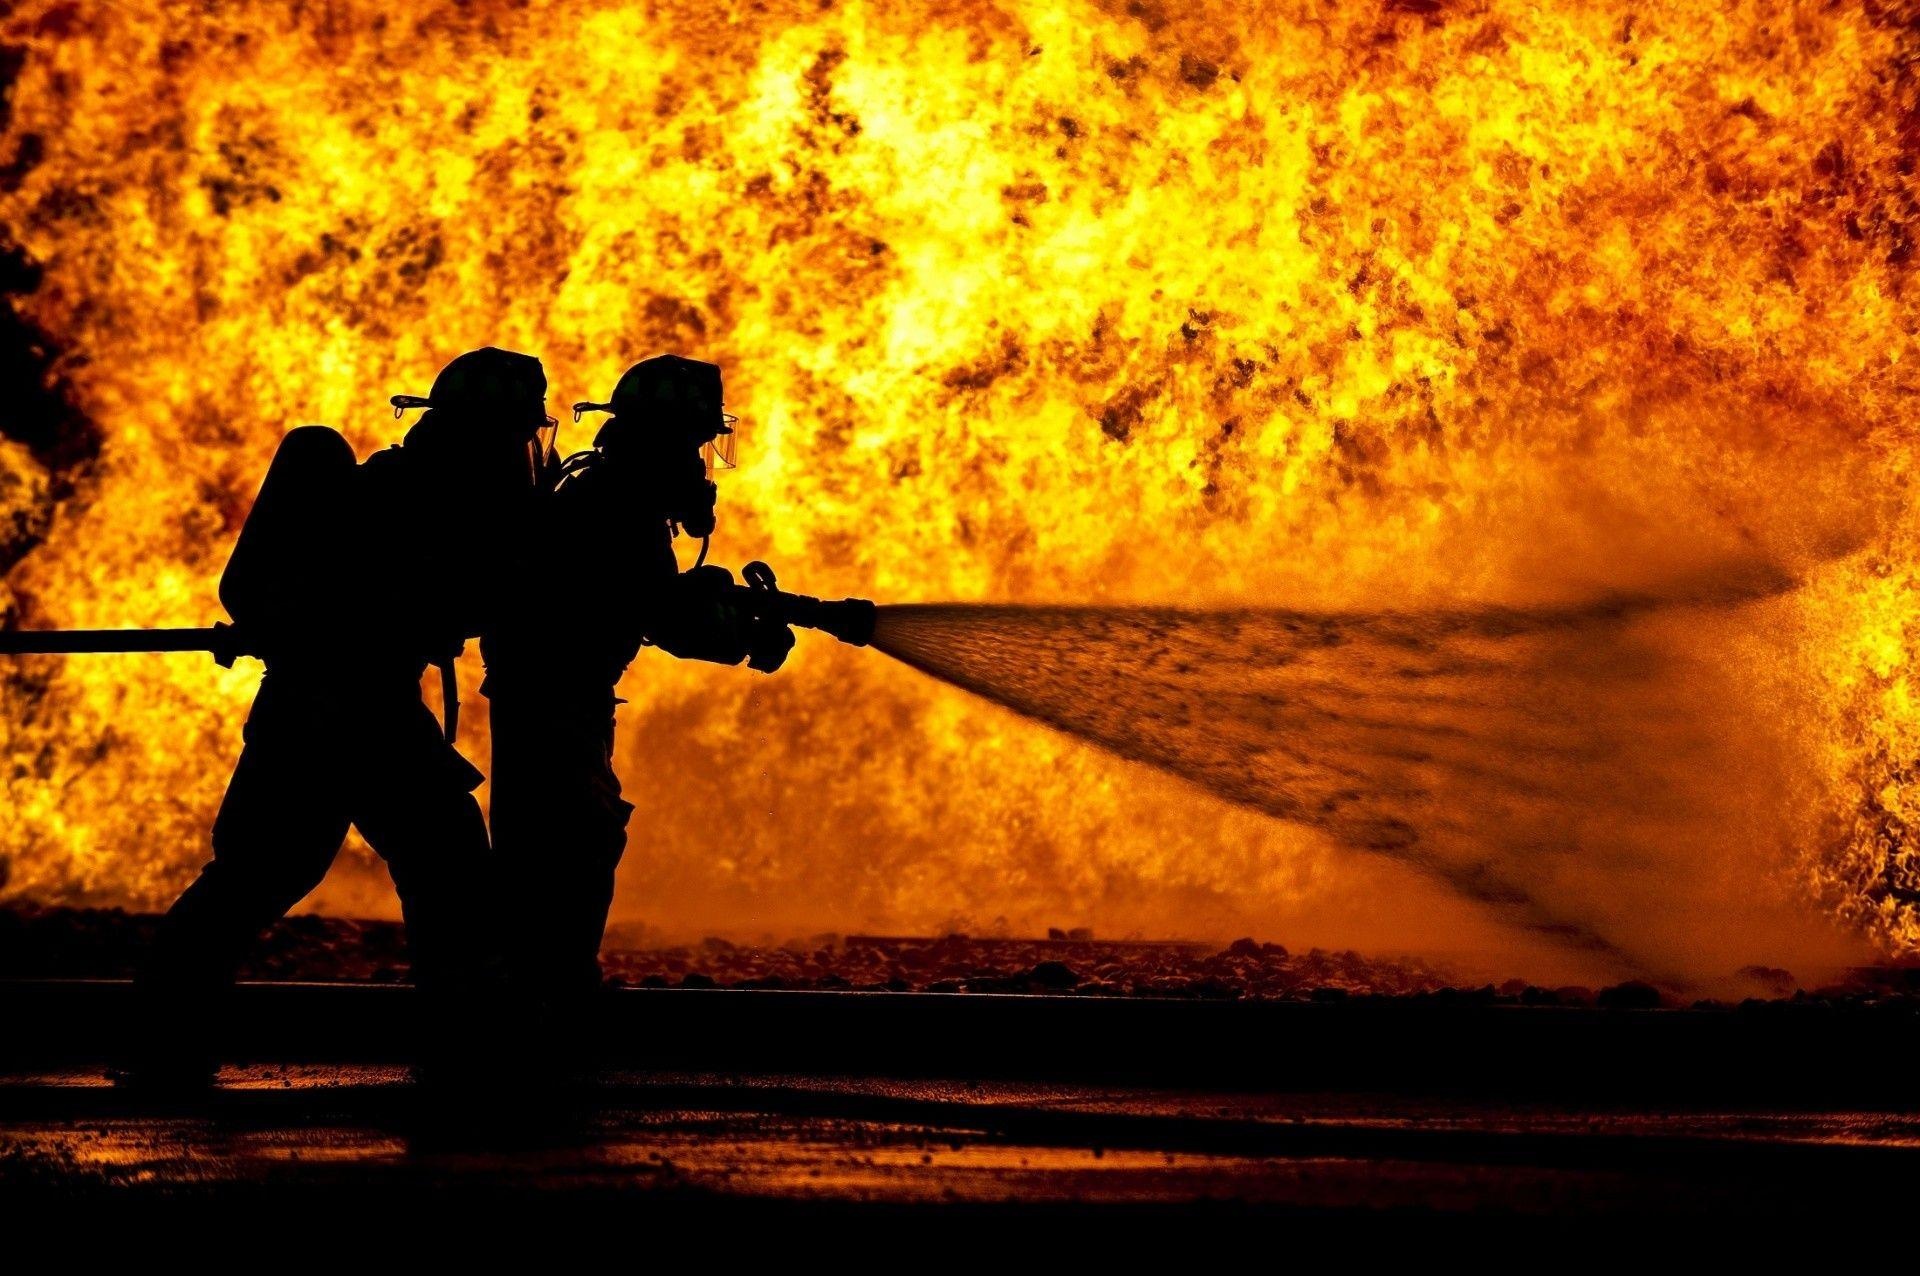 Fireman: Rescuer extensively trained in firefighting, Fire suppression, rescue, and hazardous materials mitigation. 1920x1280 HD Wallpaper.